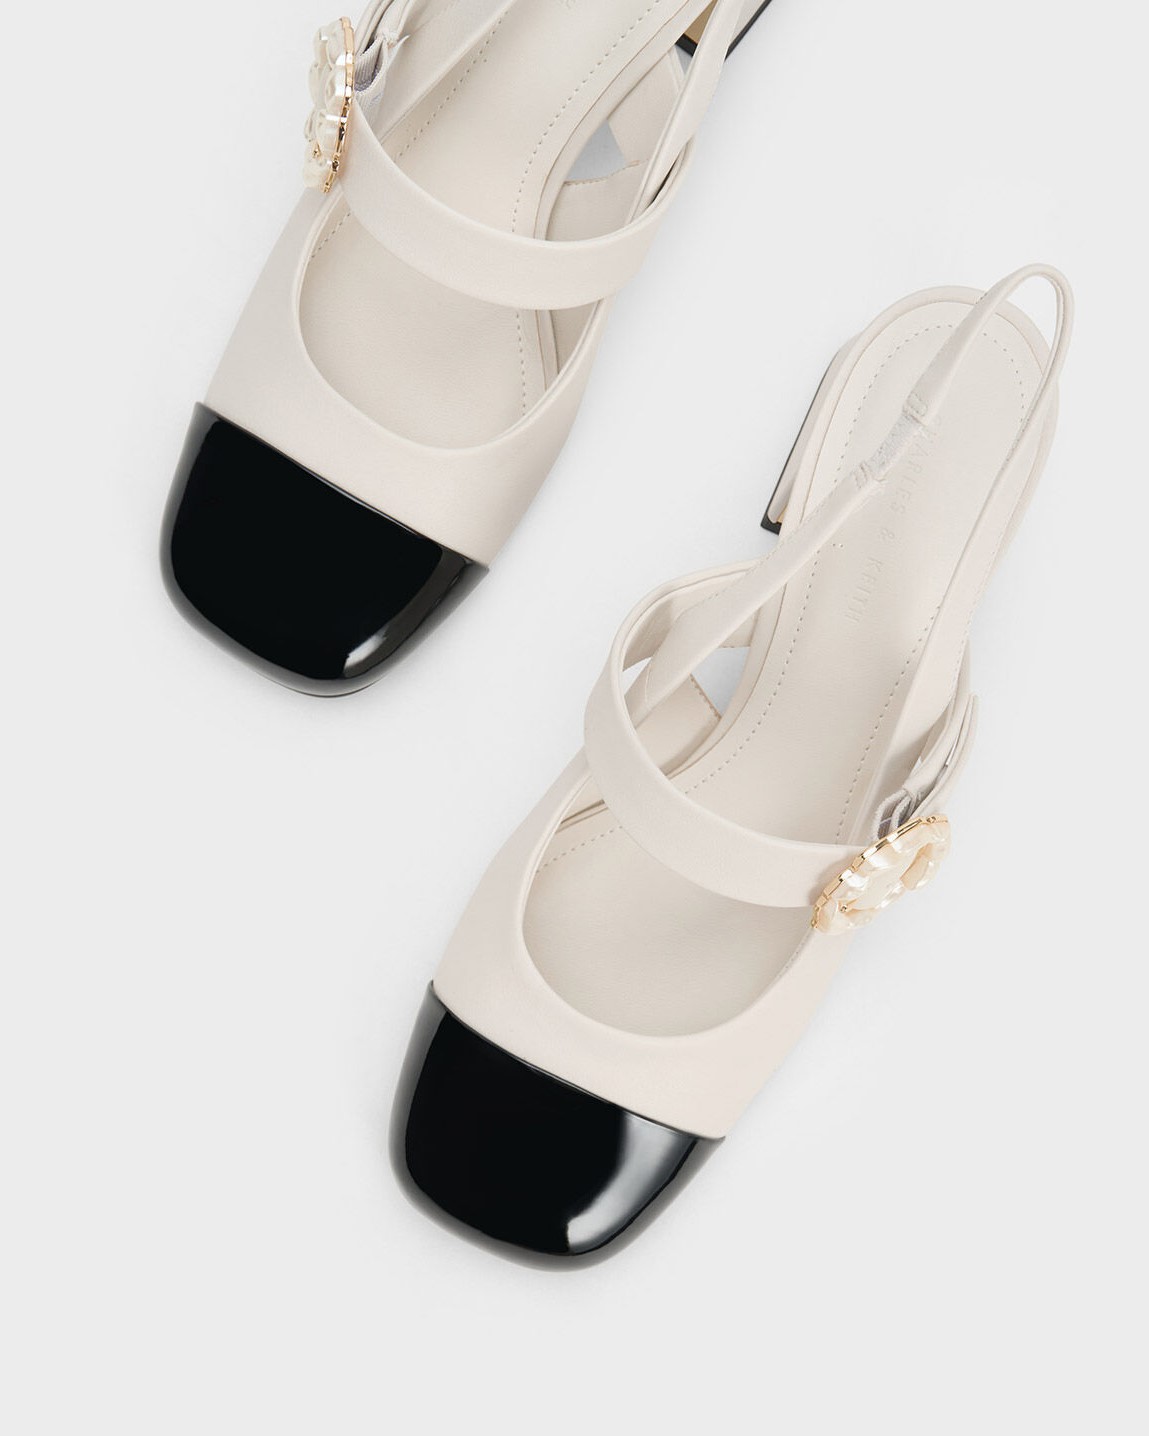 GIÀY BÍT MŨI CNK CHARLES KEITH PATENT TWO-TONE PEARL BUCKLE SLINGBACK PUMPS CK1-60361474 7